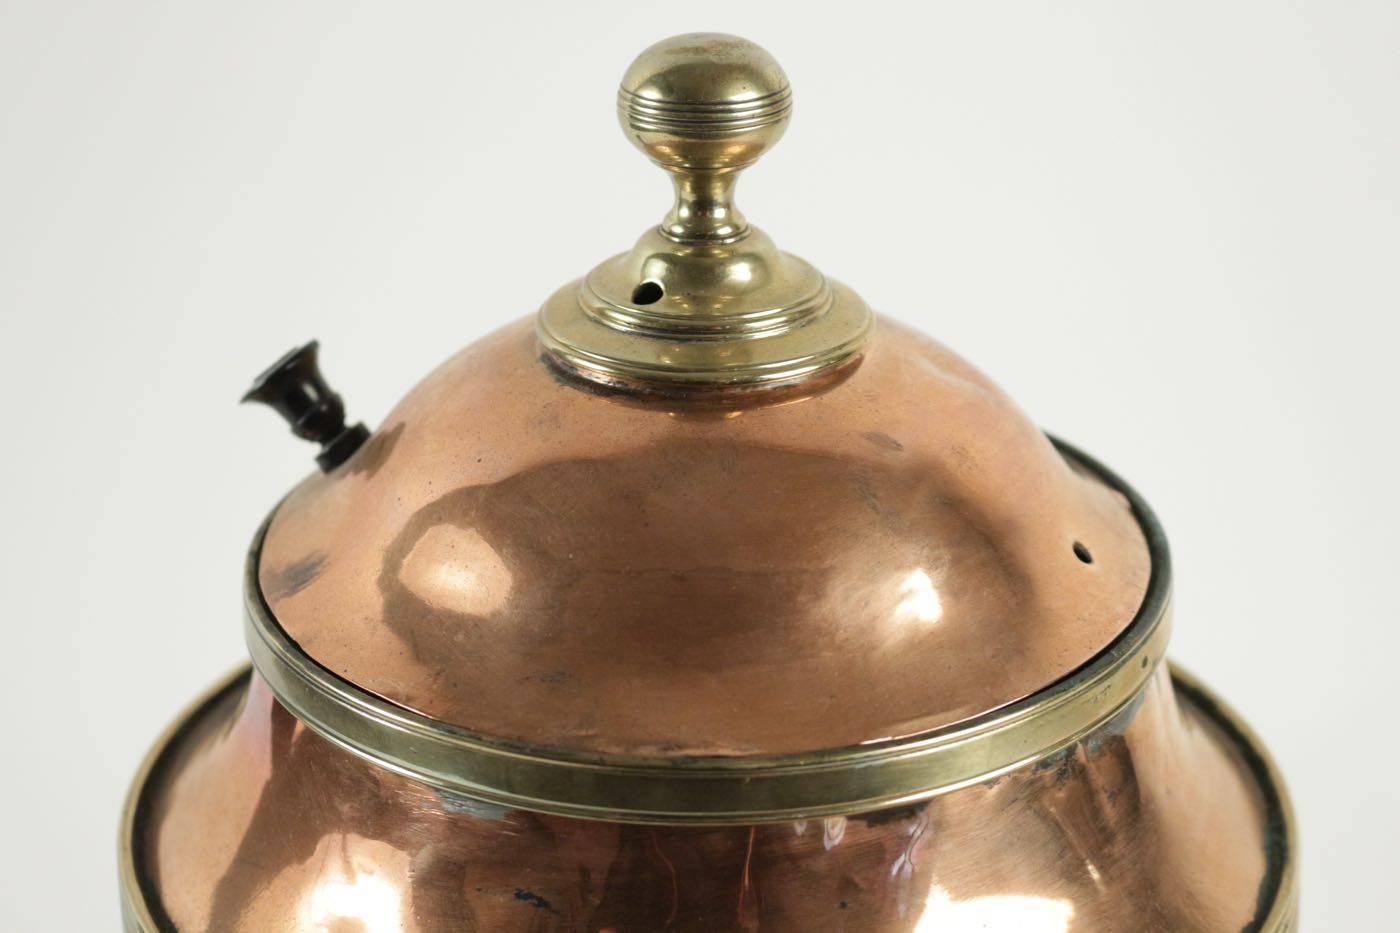 Early 19th Century English Water Warmer and Dispenser in Copper and Brass